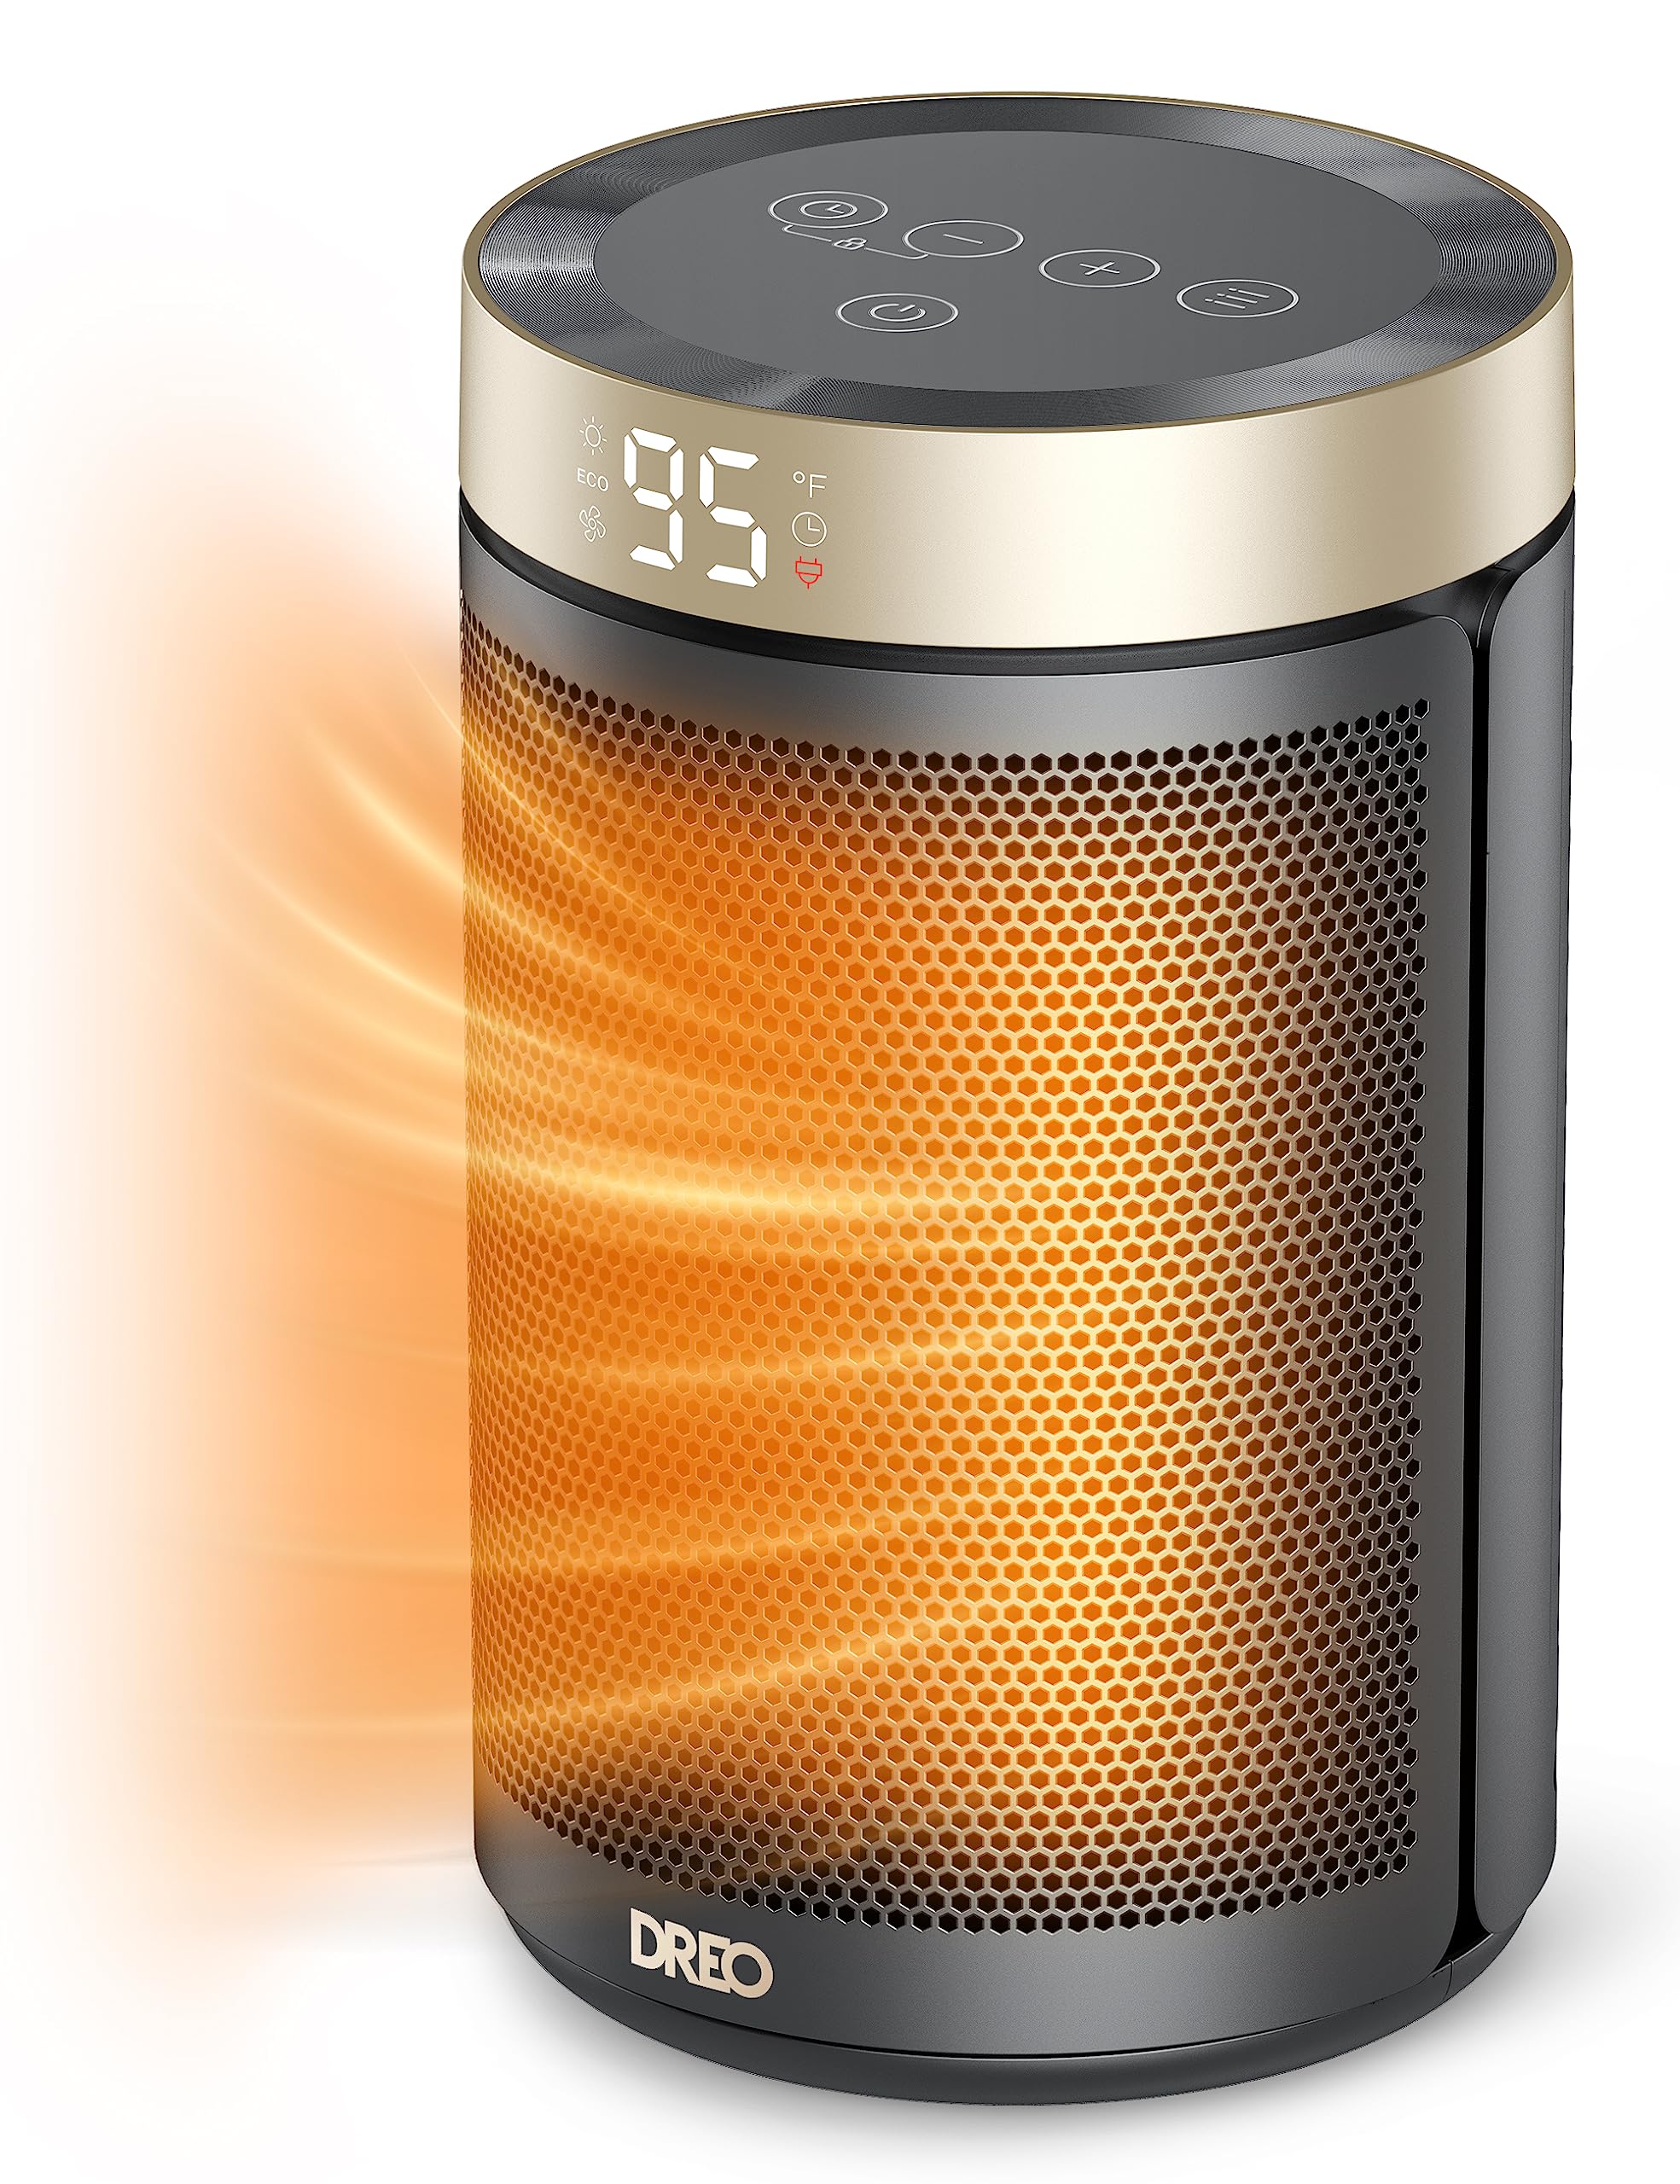 Dreo Space Heater, Portable Electric Heaters for Indoor Use with Thermostat, Digital Display, 1-12H Timer, Eco Mode and Fan Mode, 1500W PTC Ceramic Fast Safety Heat Only $29.99